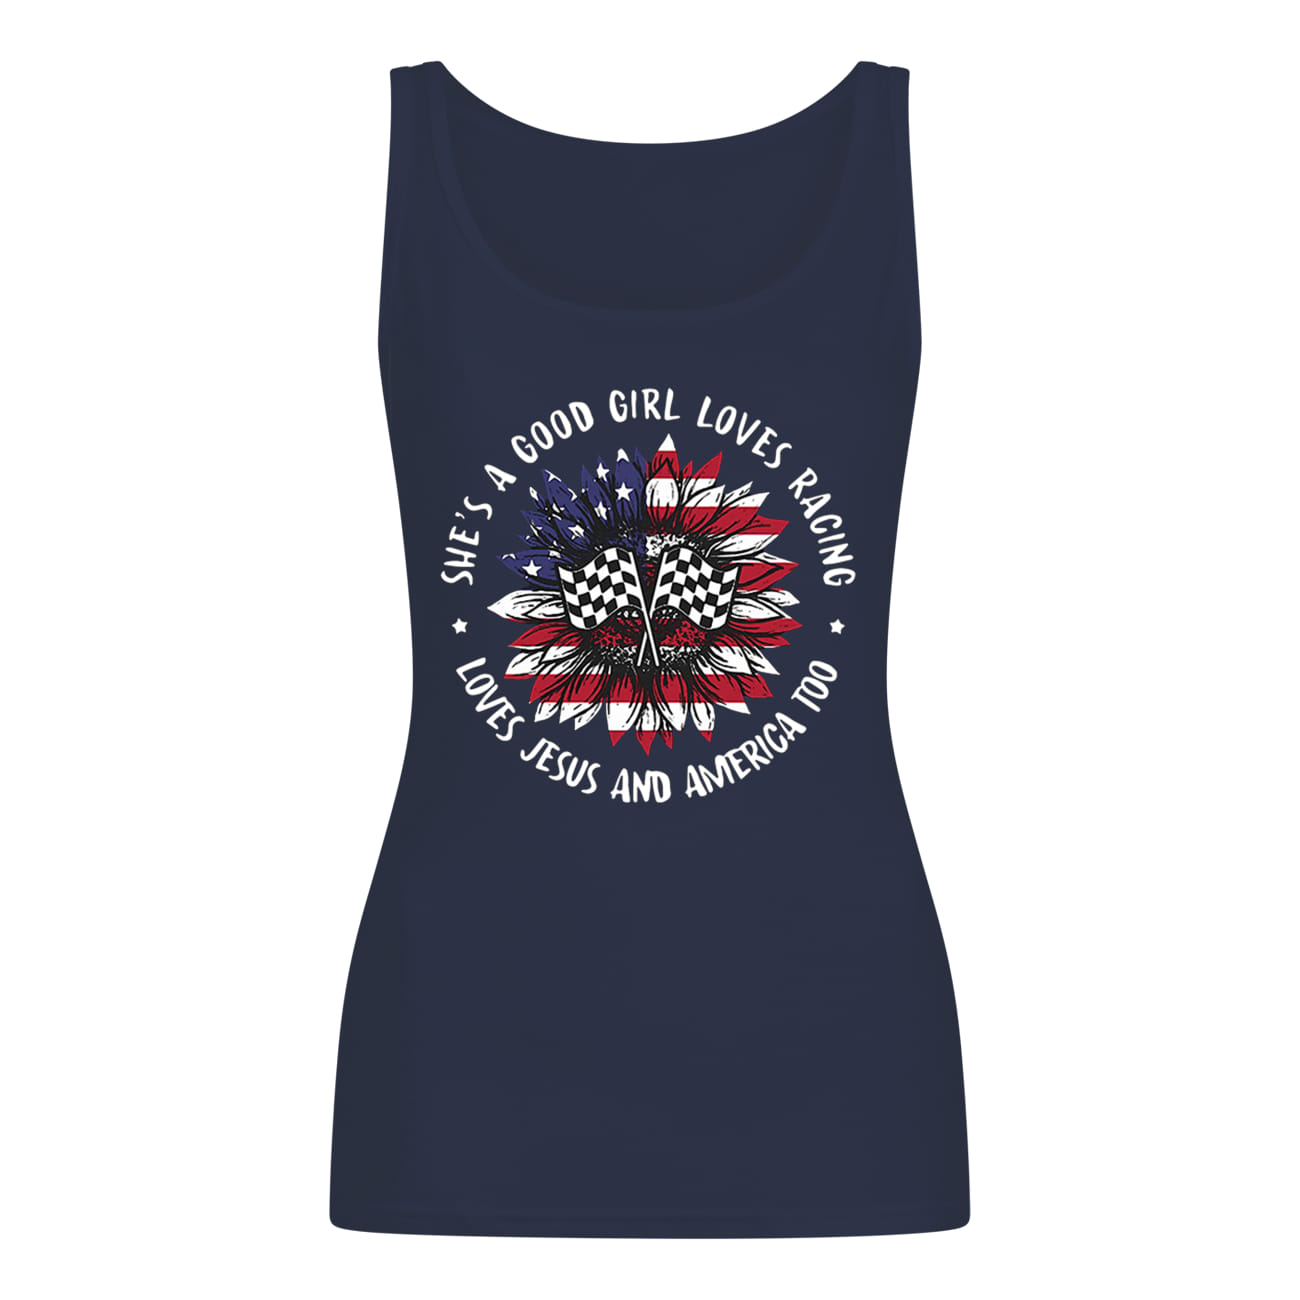 Hippie sunflower usa flag she is a good girl loves her mama loves jesus and america too tank top